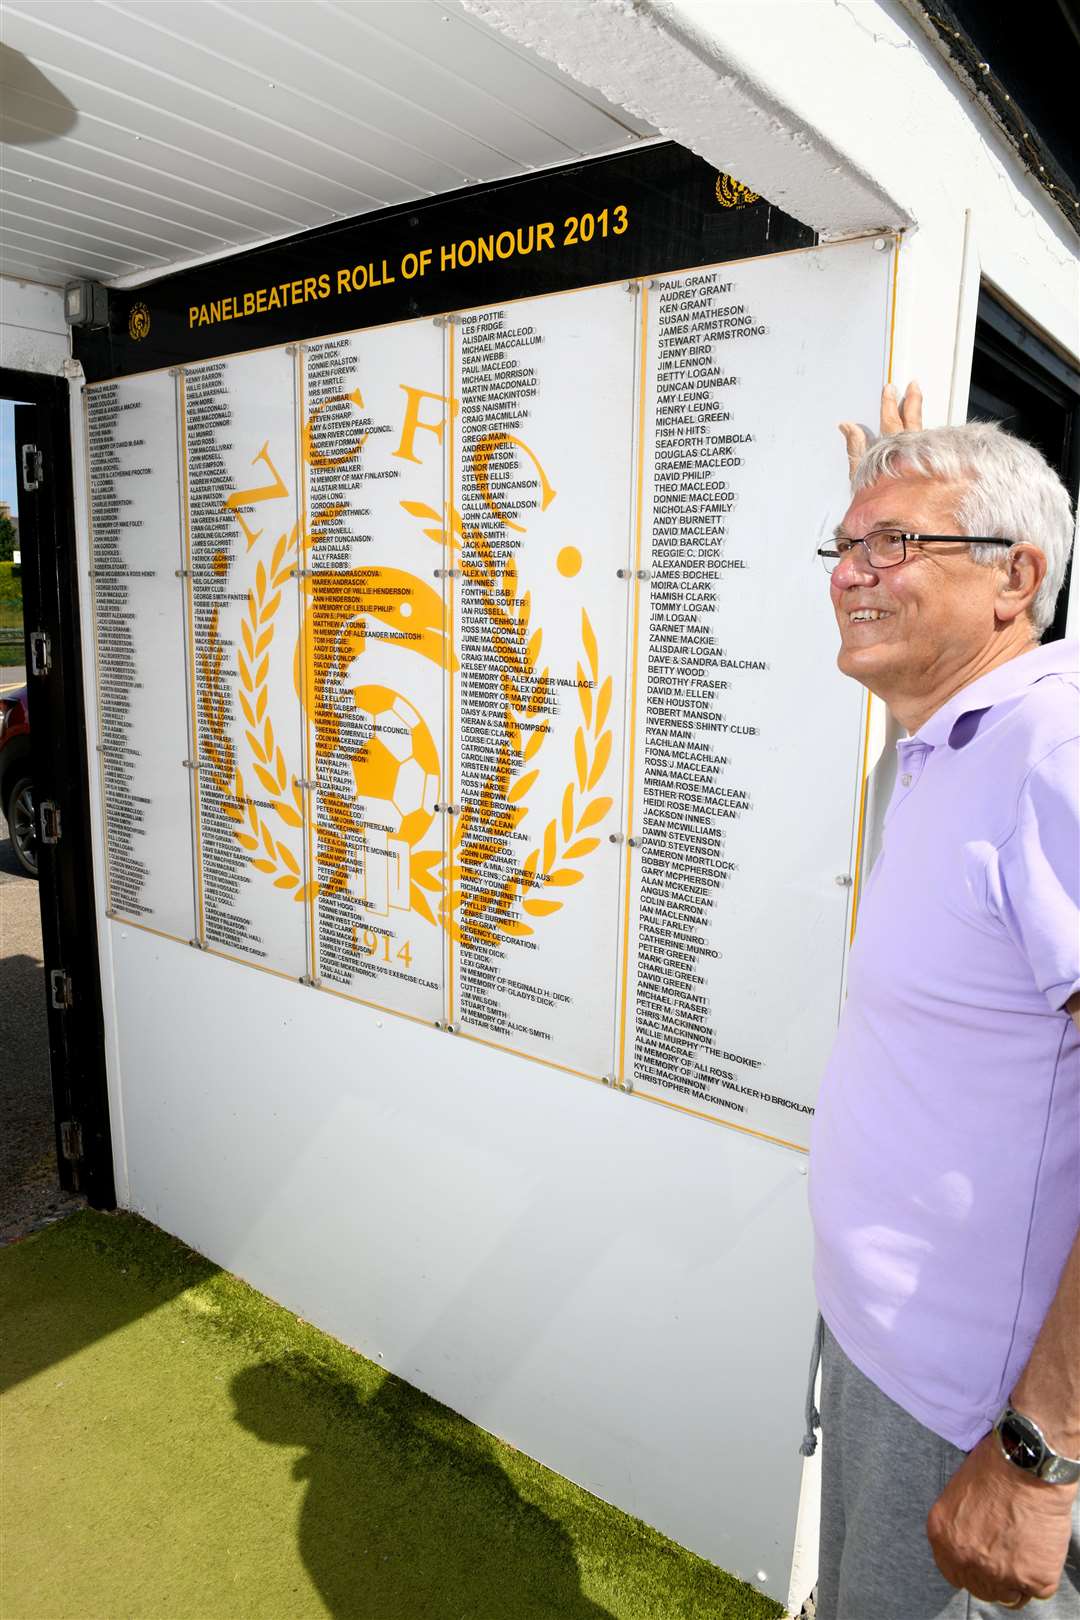 Panelbeaters Roll of Honour with organiser Donald Wilson. Over 500 people subscribed in a fund raising effort over 7 years which generated £100,000 for ground improvements. Picture: James Mackenzie.